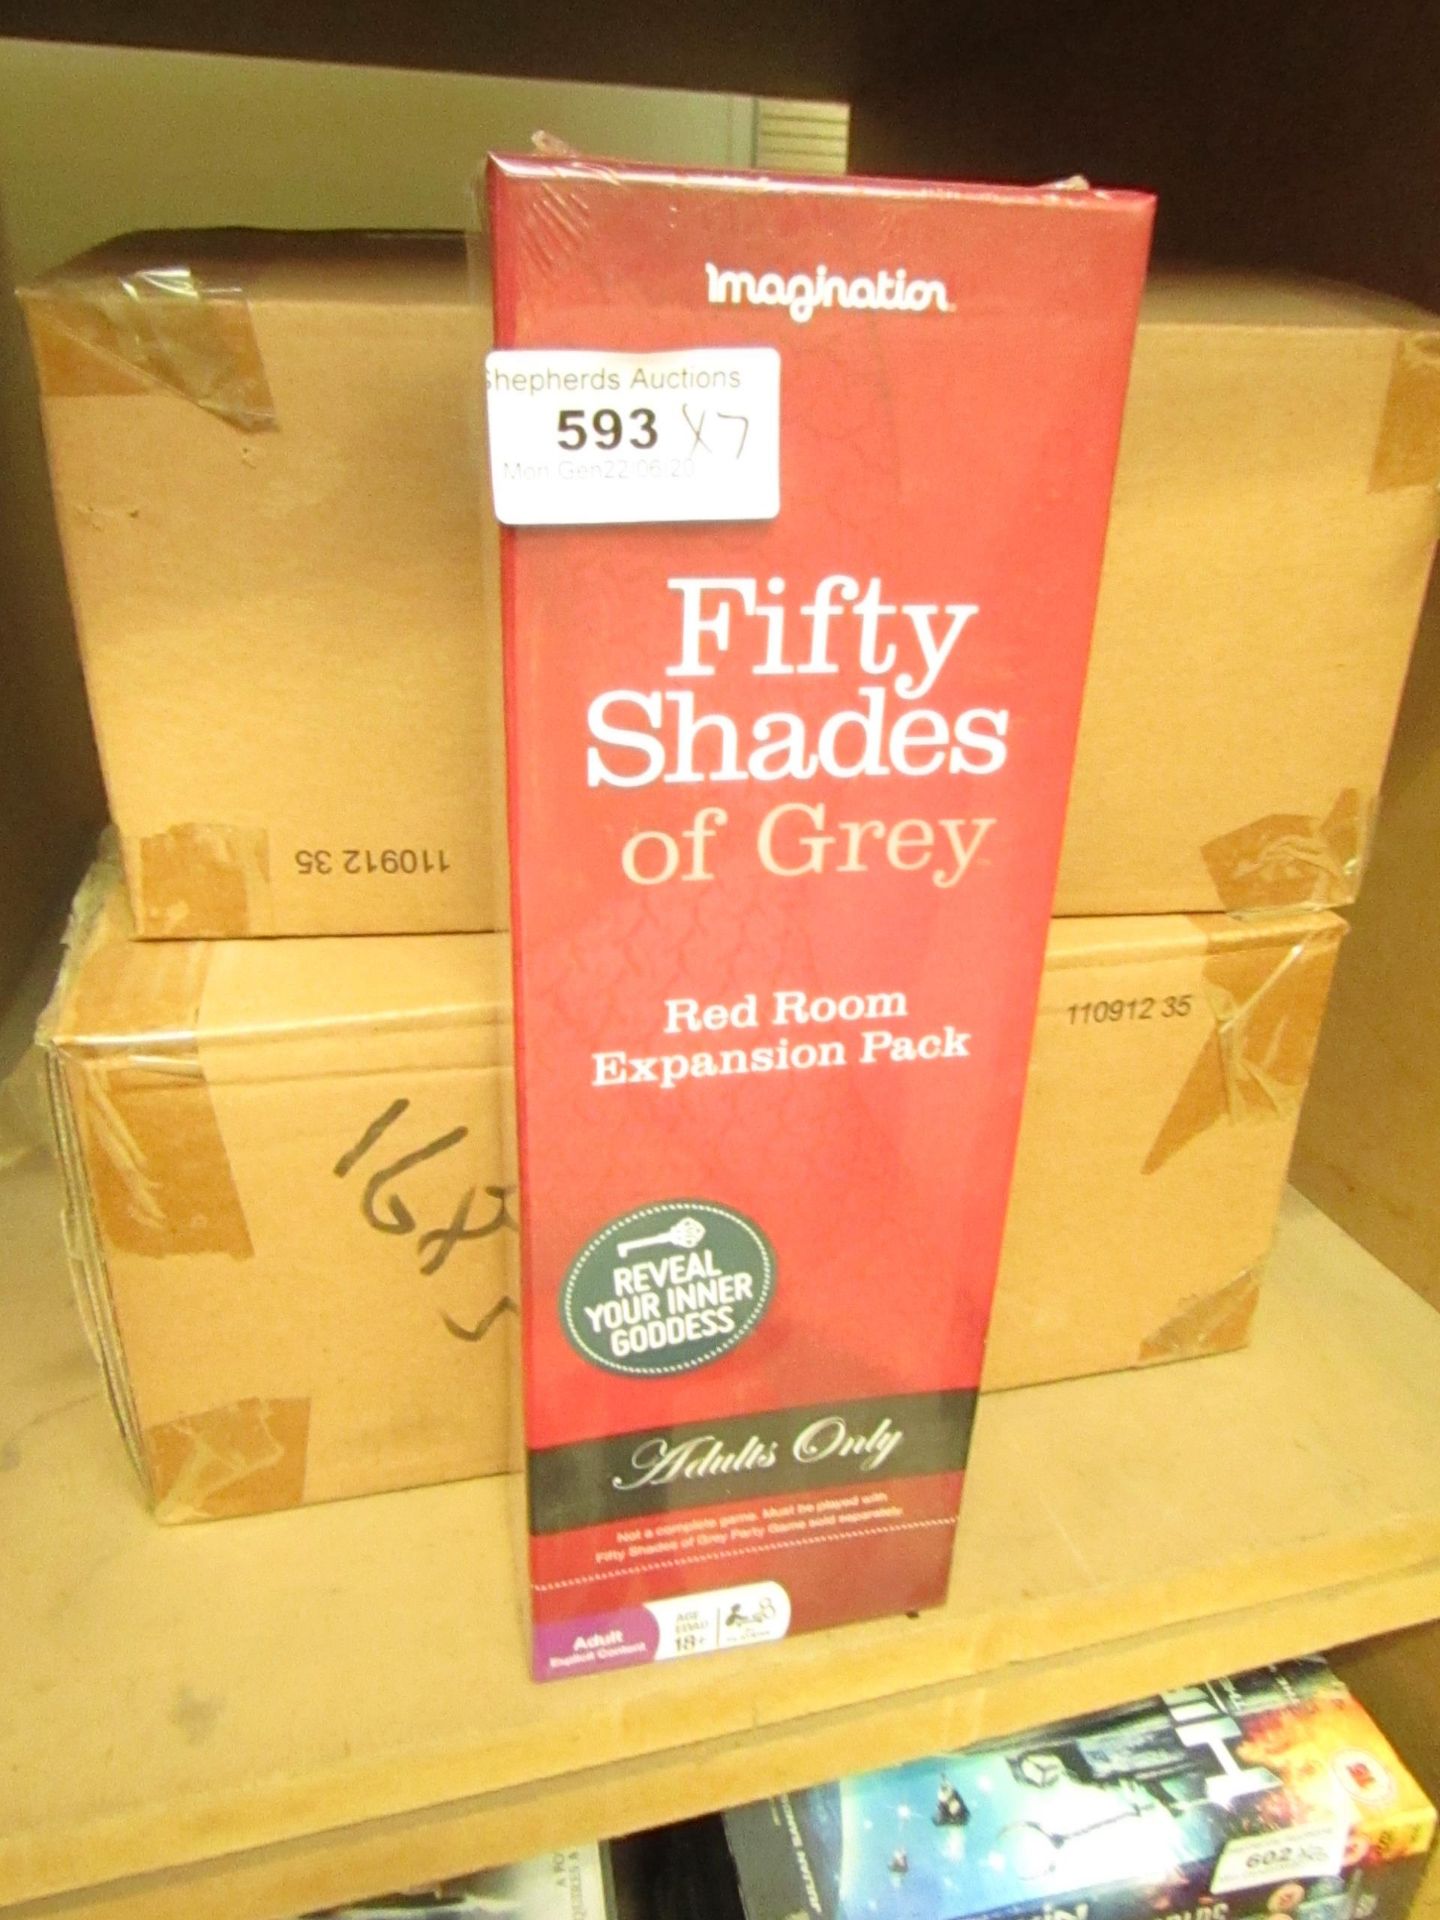 7 x Fifty Shades Red room Expansion Packs. New & boxed